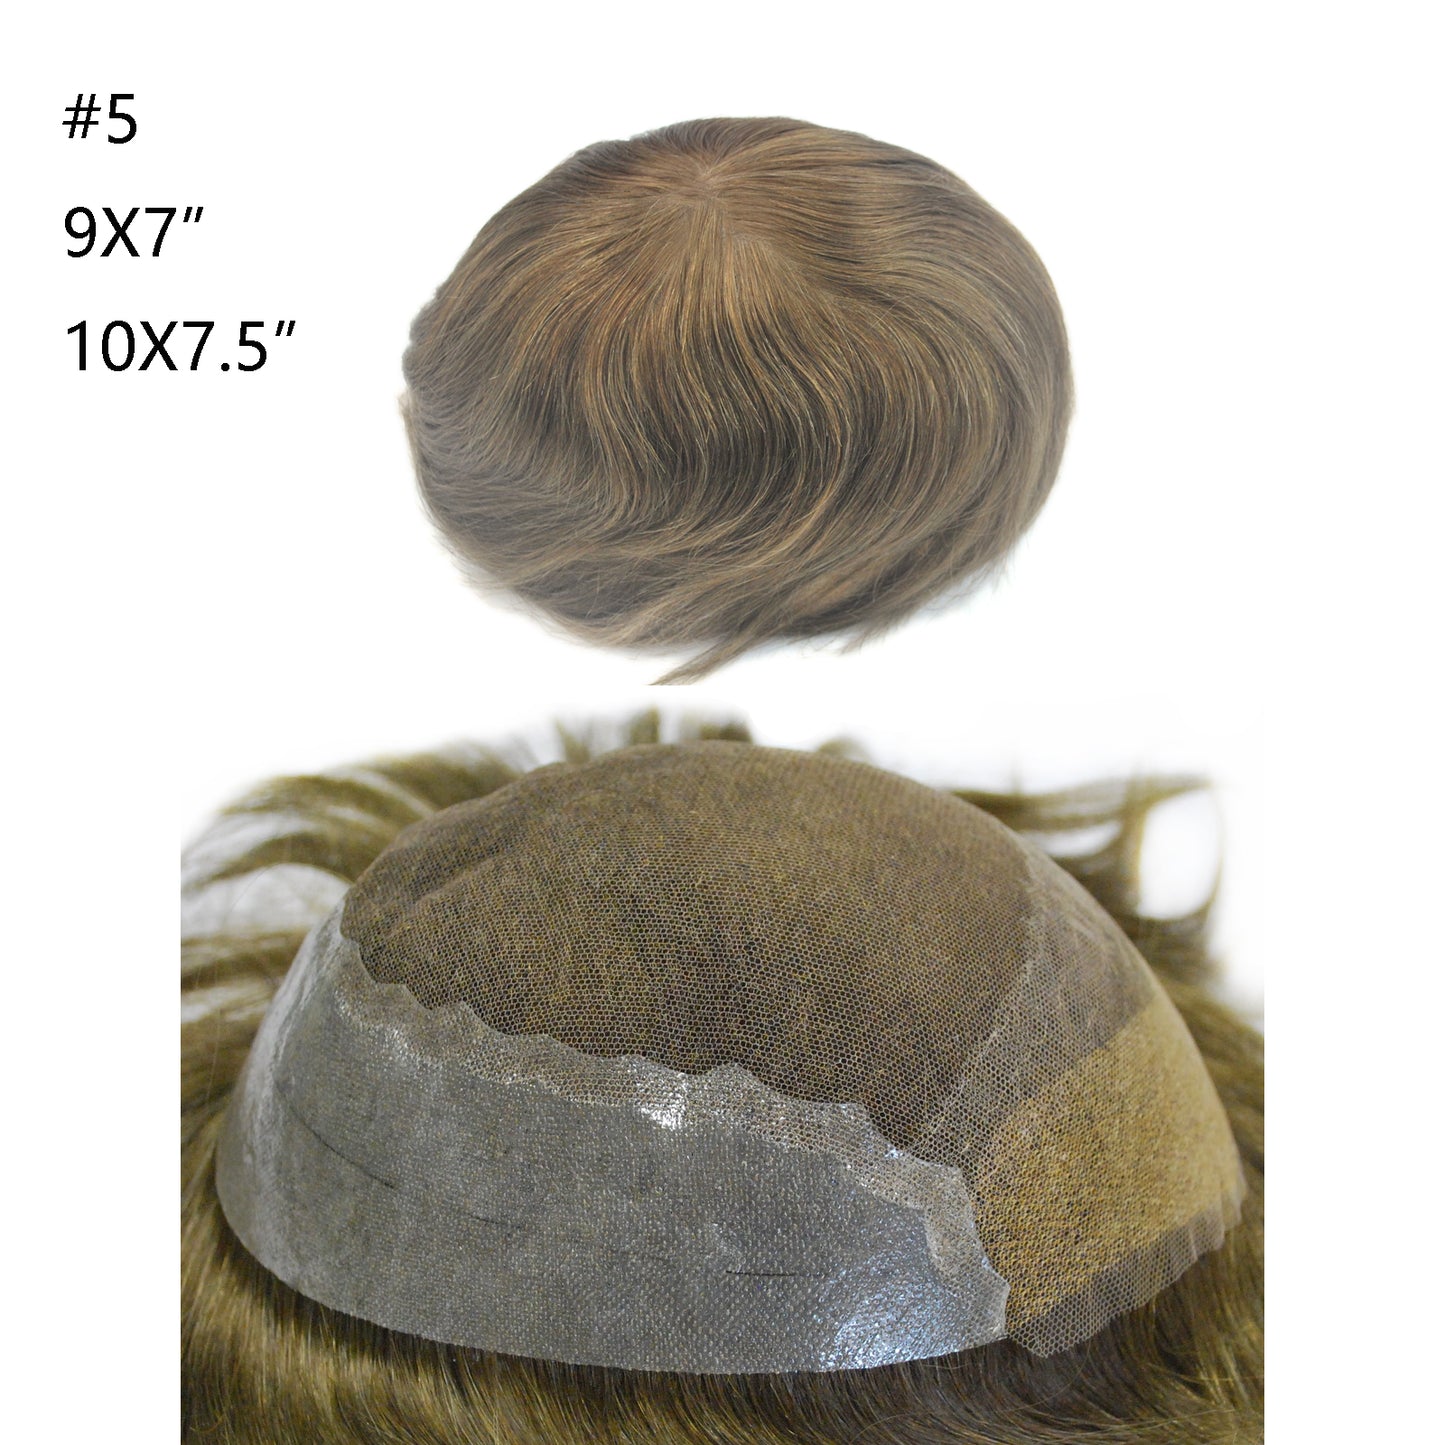 #5 light brown human hair system for men French lace with PU men toupee wig